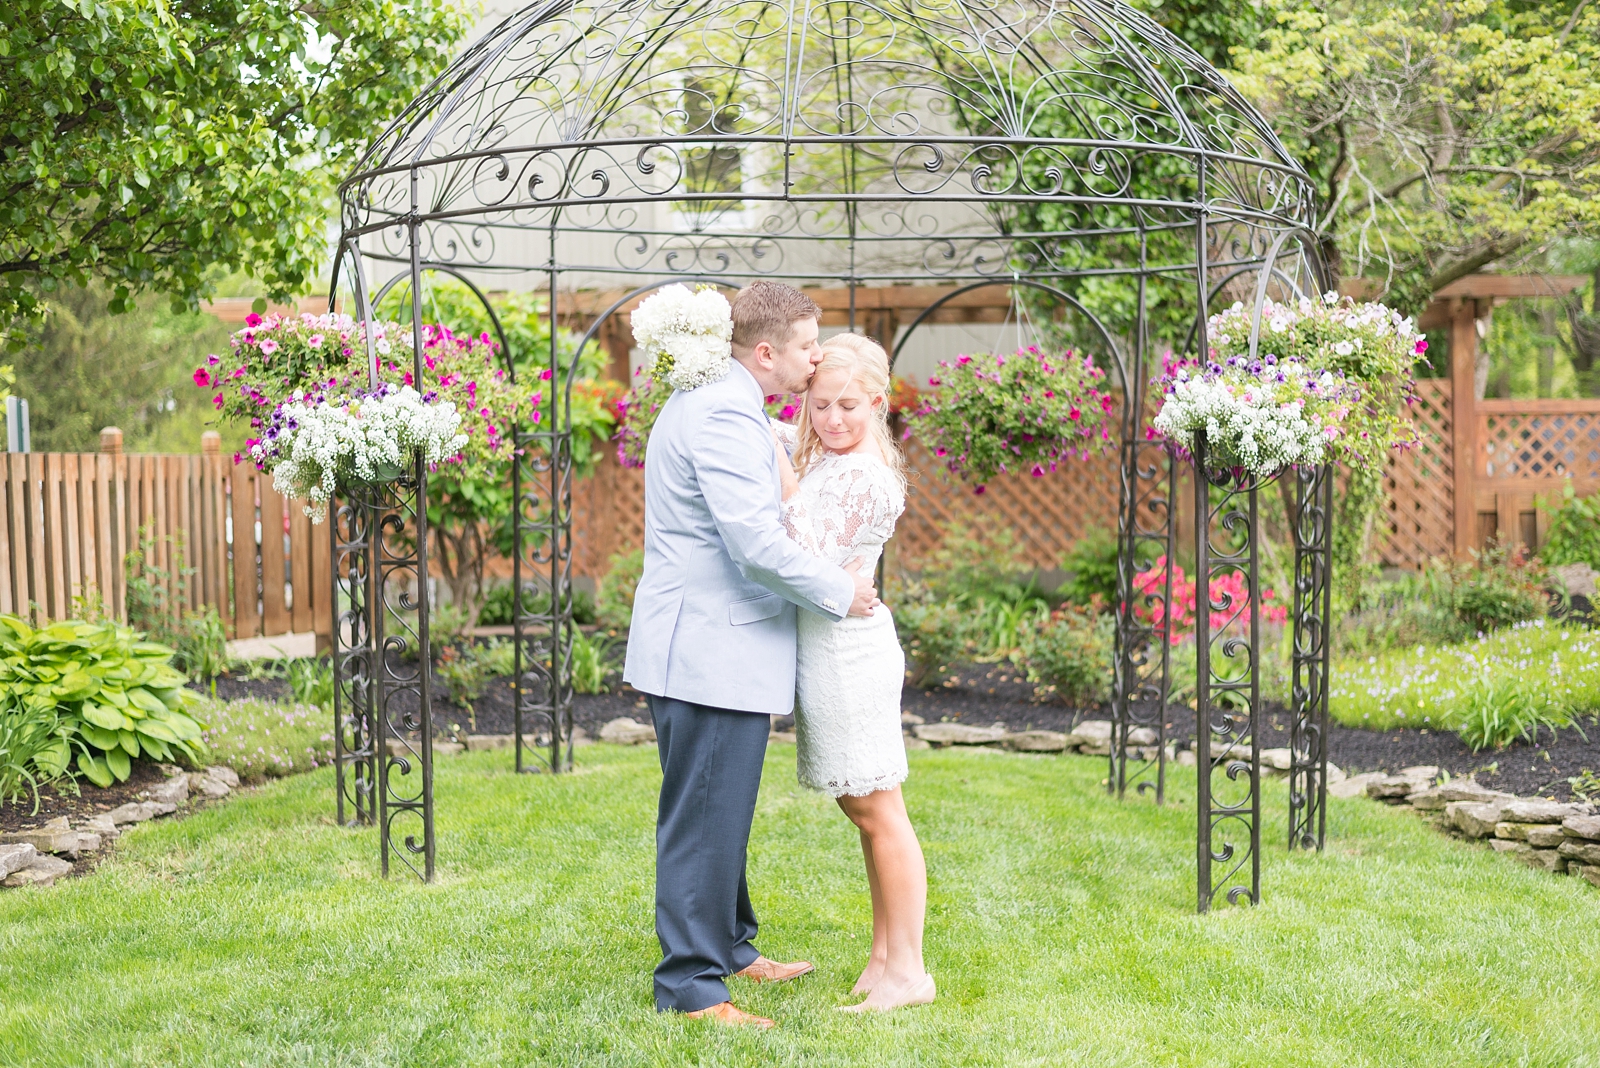 couple-standing-in-a-garden-with-flowers-kissing